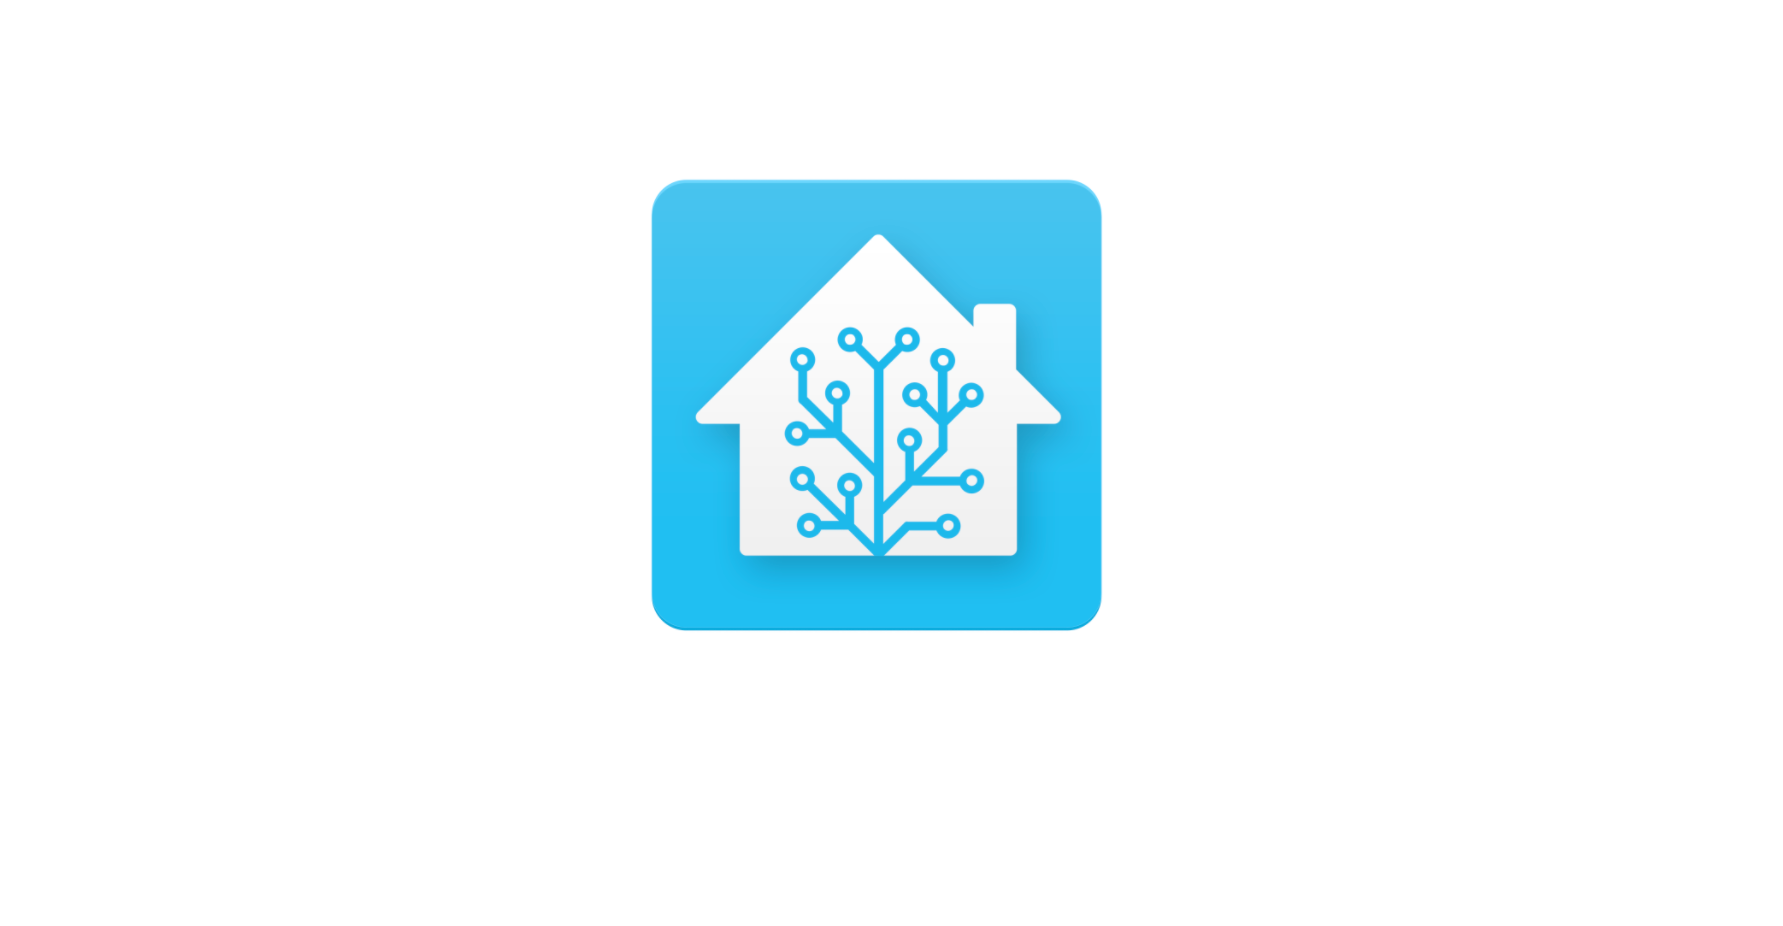 Home assistant https. Логотип Home Assistant. Hassio Home Assistant. Home Assistant картинки. Значок Home Assistant icon.